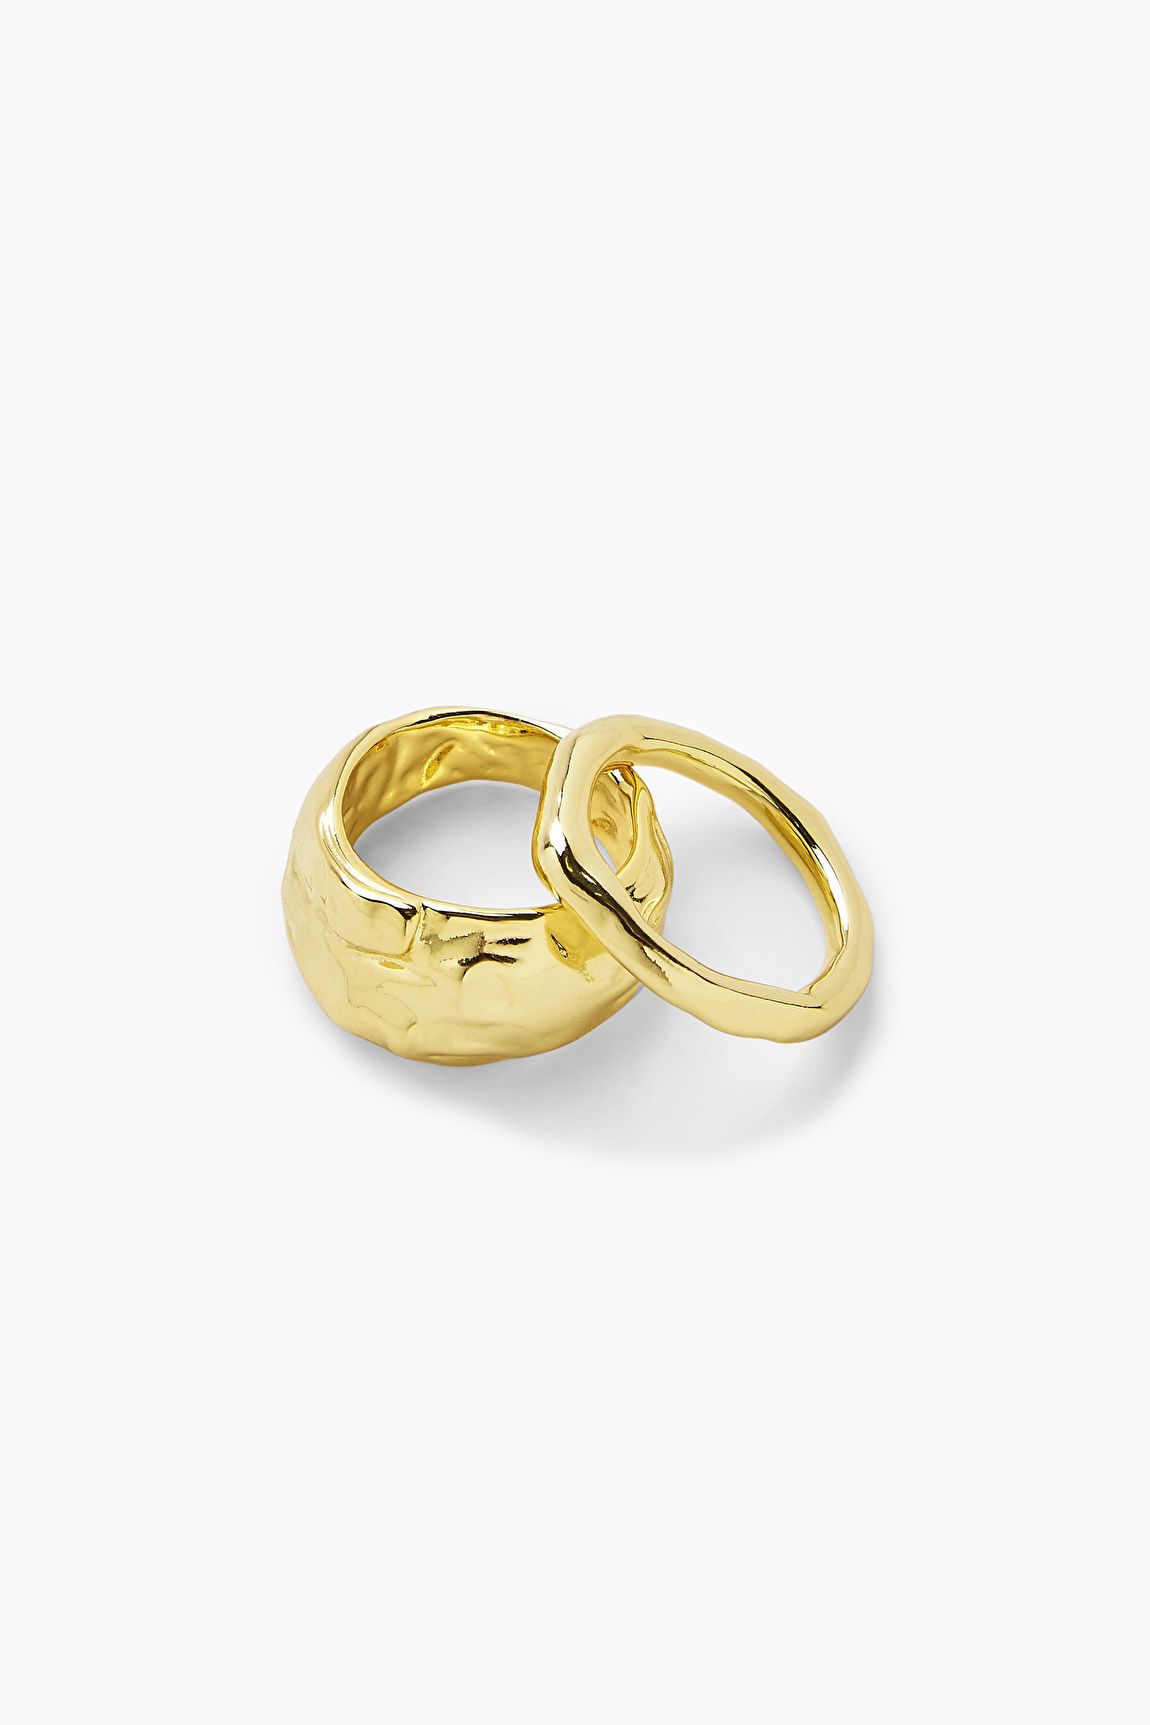 HAMMERED RING SET - GOLD - COS | COS UK